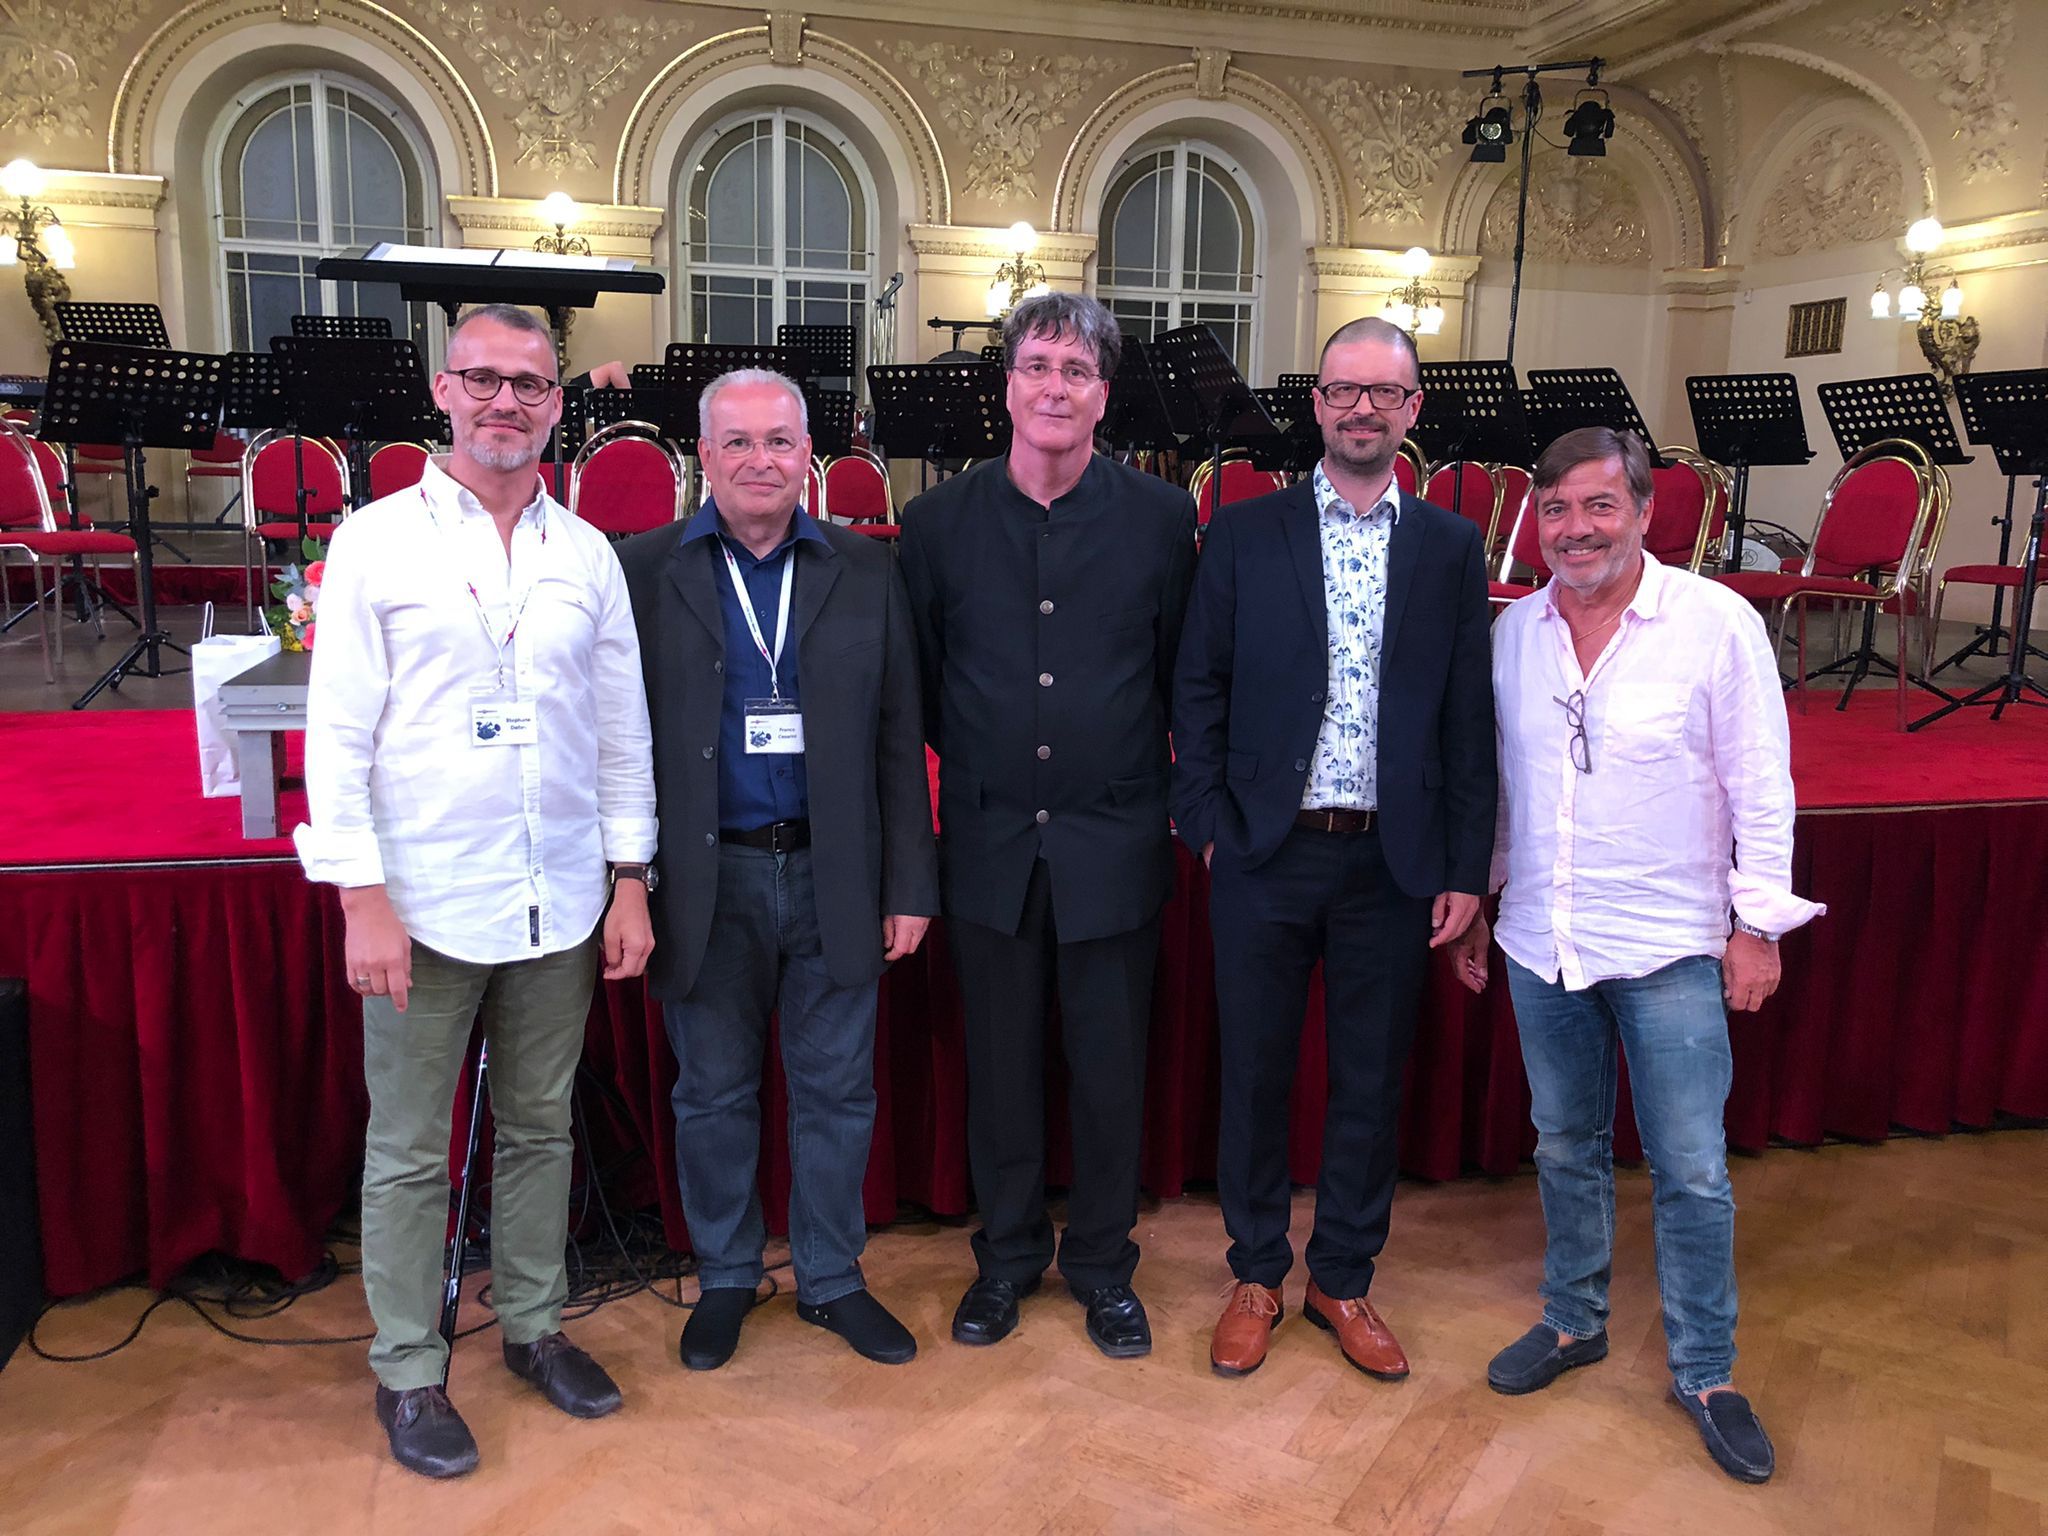 Franco Cesarini, Stéphane Delley, Rolf Schumacher, Stephan Hodel & Felix Hauswirth at the WASBE Conference in Prague (Czech Republic), 22nd July, 2022           at the WASBE Conference in Prague (Czech Republic), 19th-23rd July, 2022